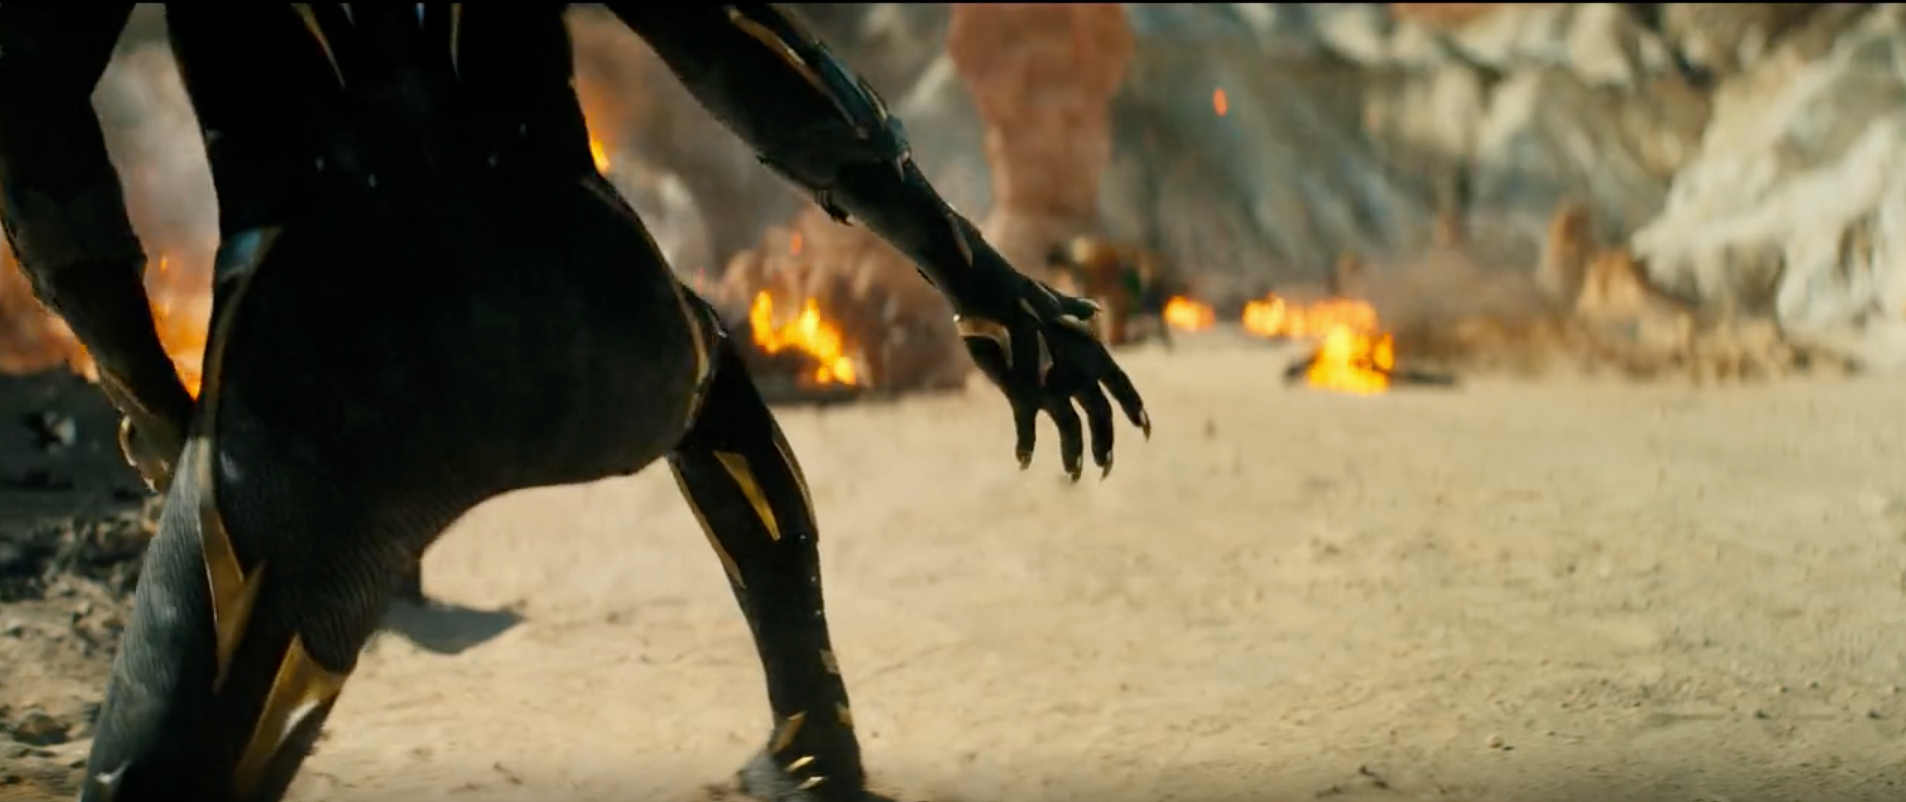 black-panther-2-trailer-who-is-new-black-panther-suit